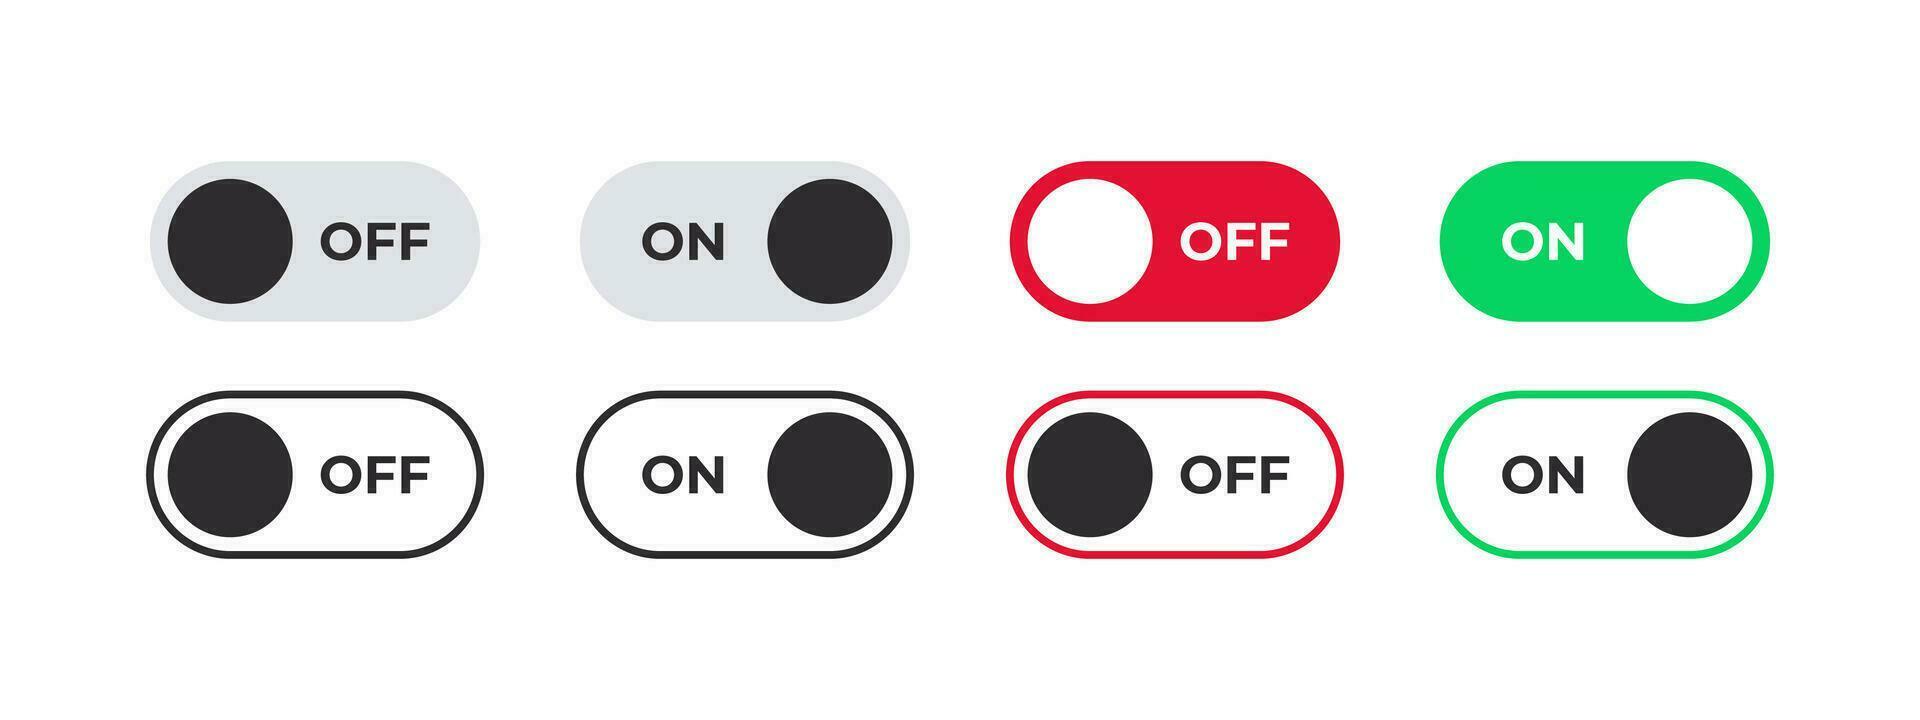 On and Off badges. On Off switcher icons. Vector scalable graphics